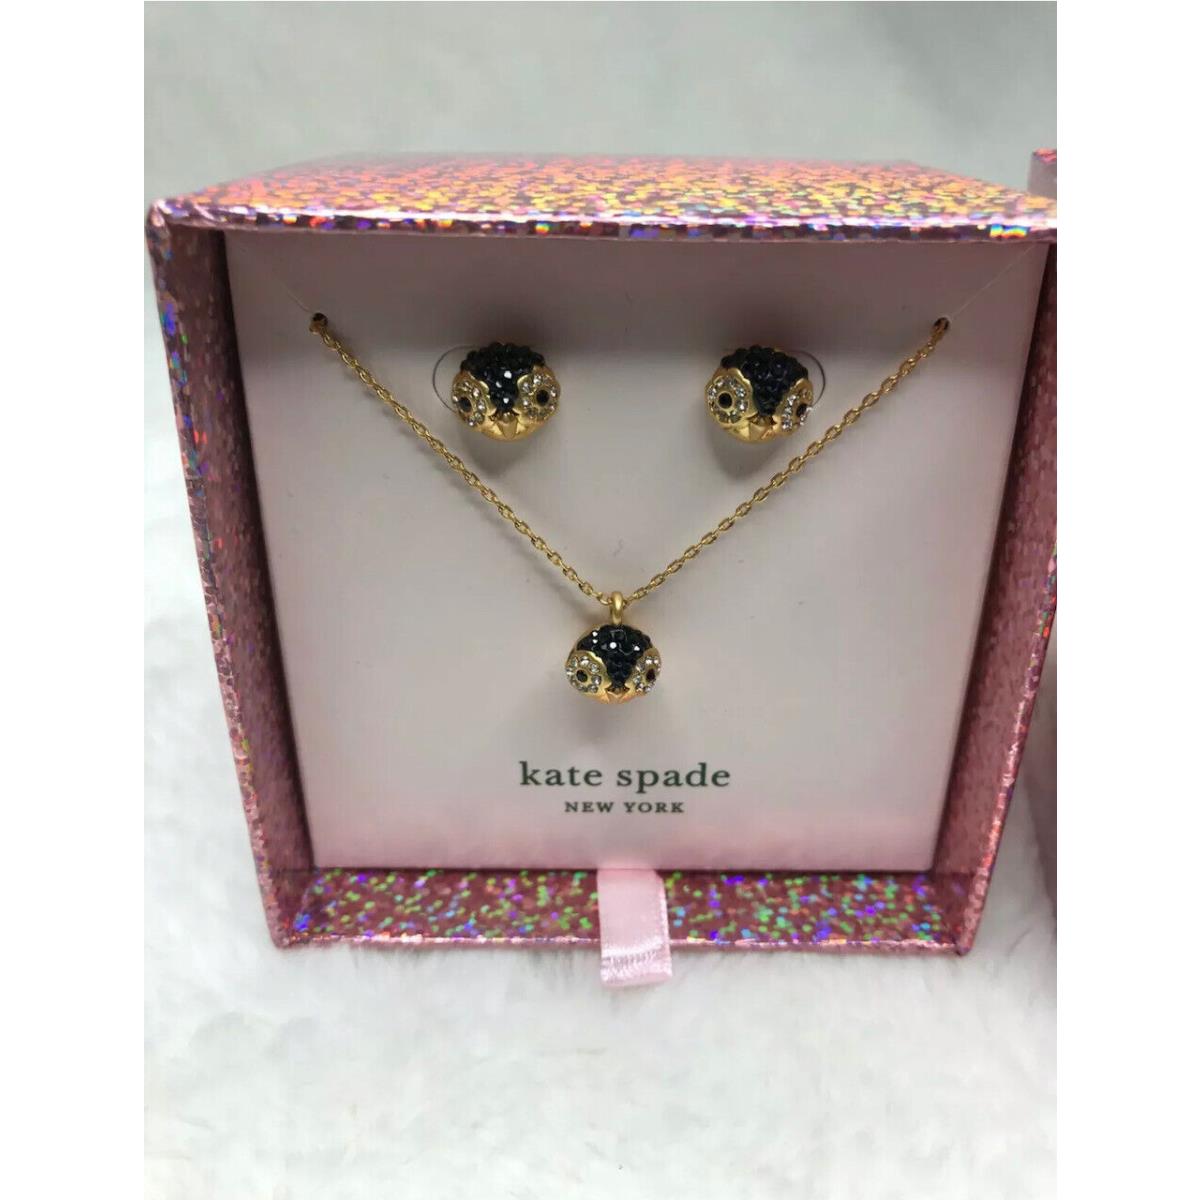 Kate Spade Stud Earrings Necklace w/ Gift Bag Great Gift